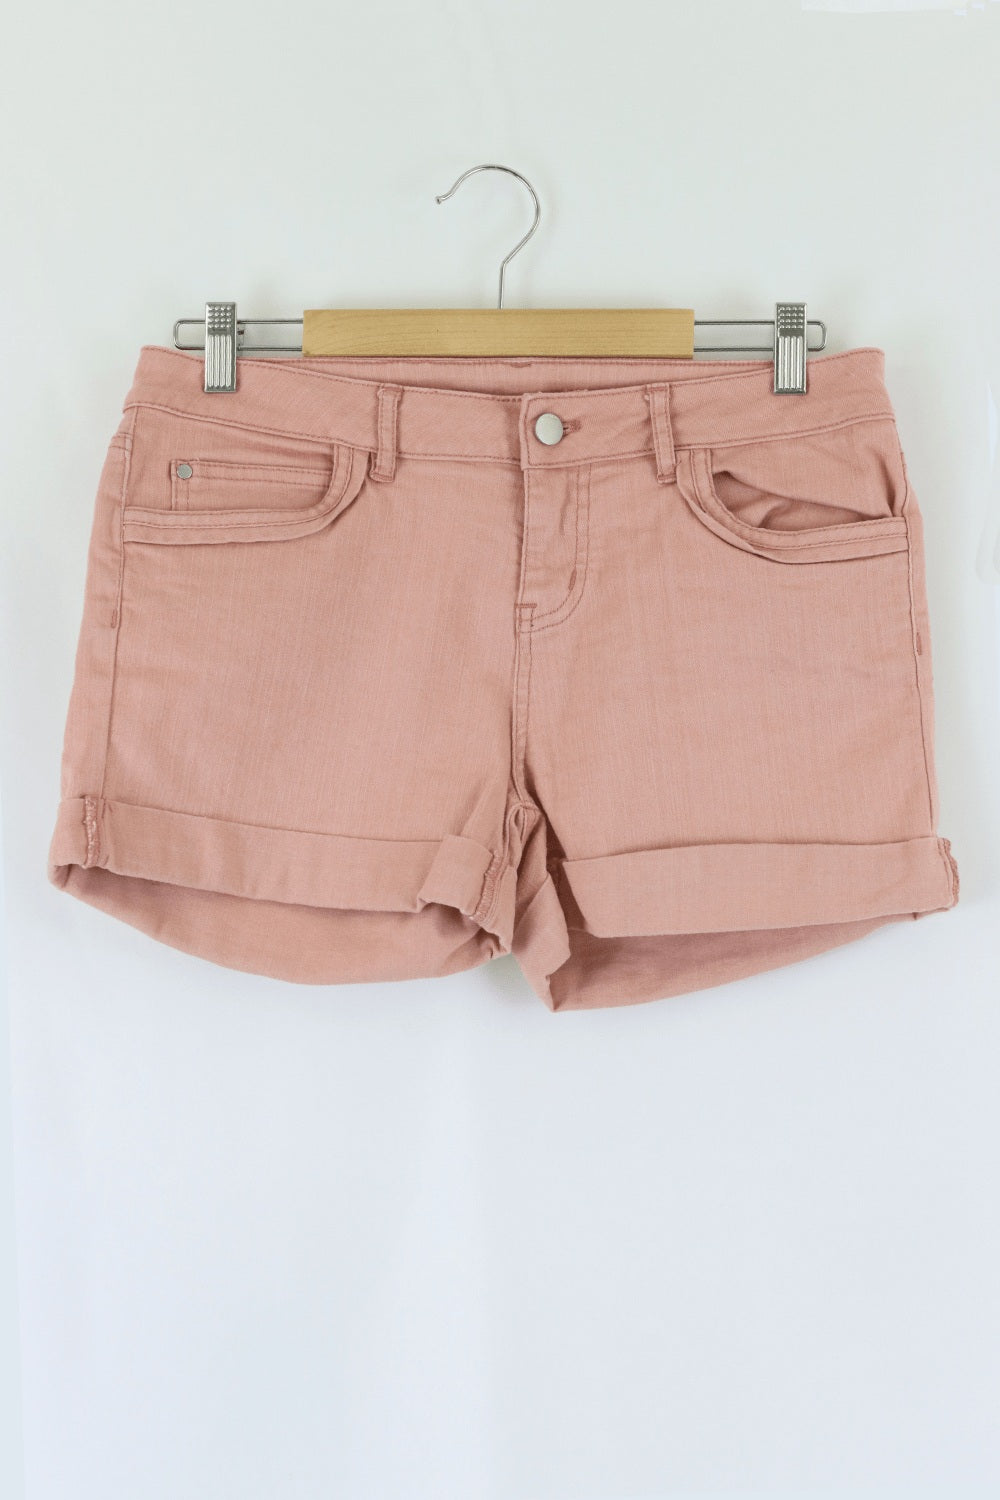 Witchery Pink Short 10